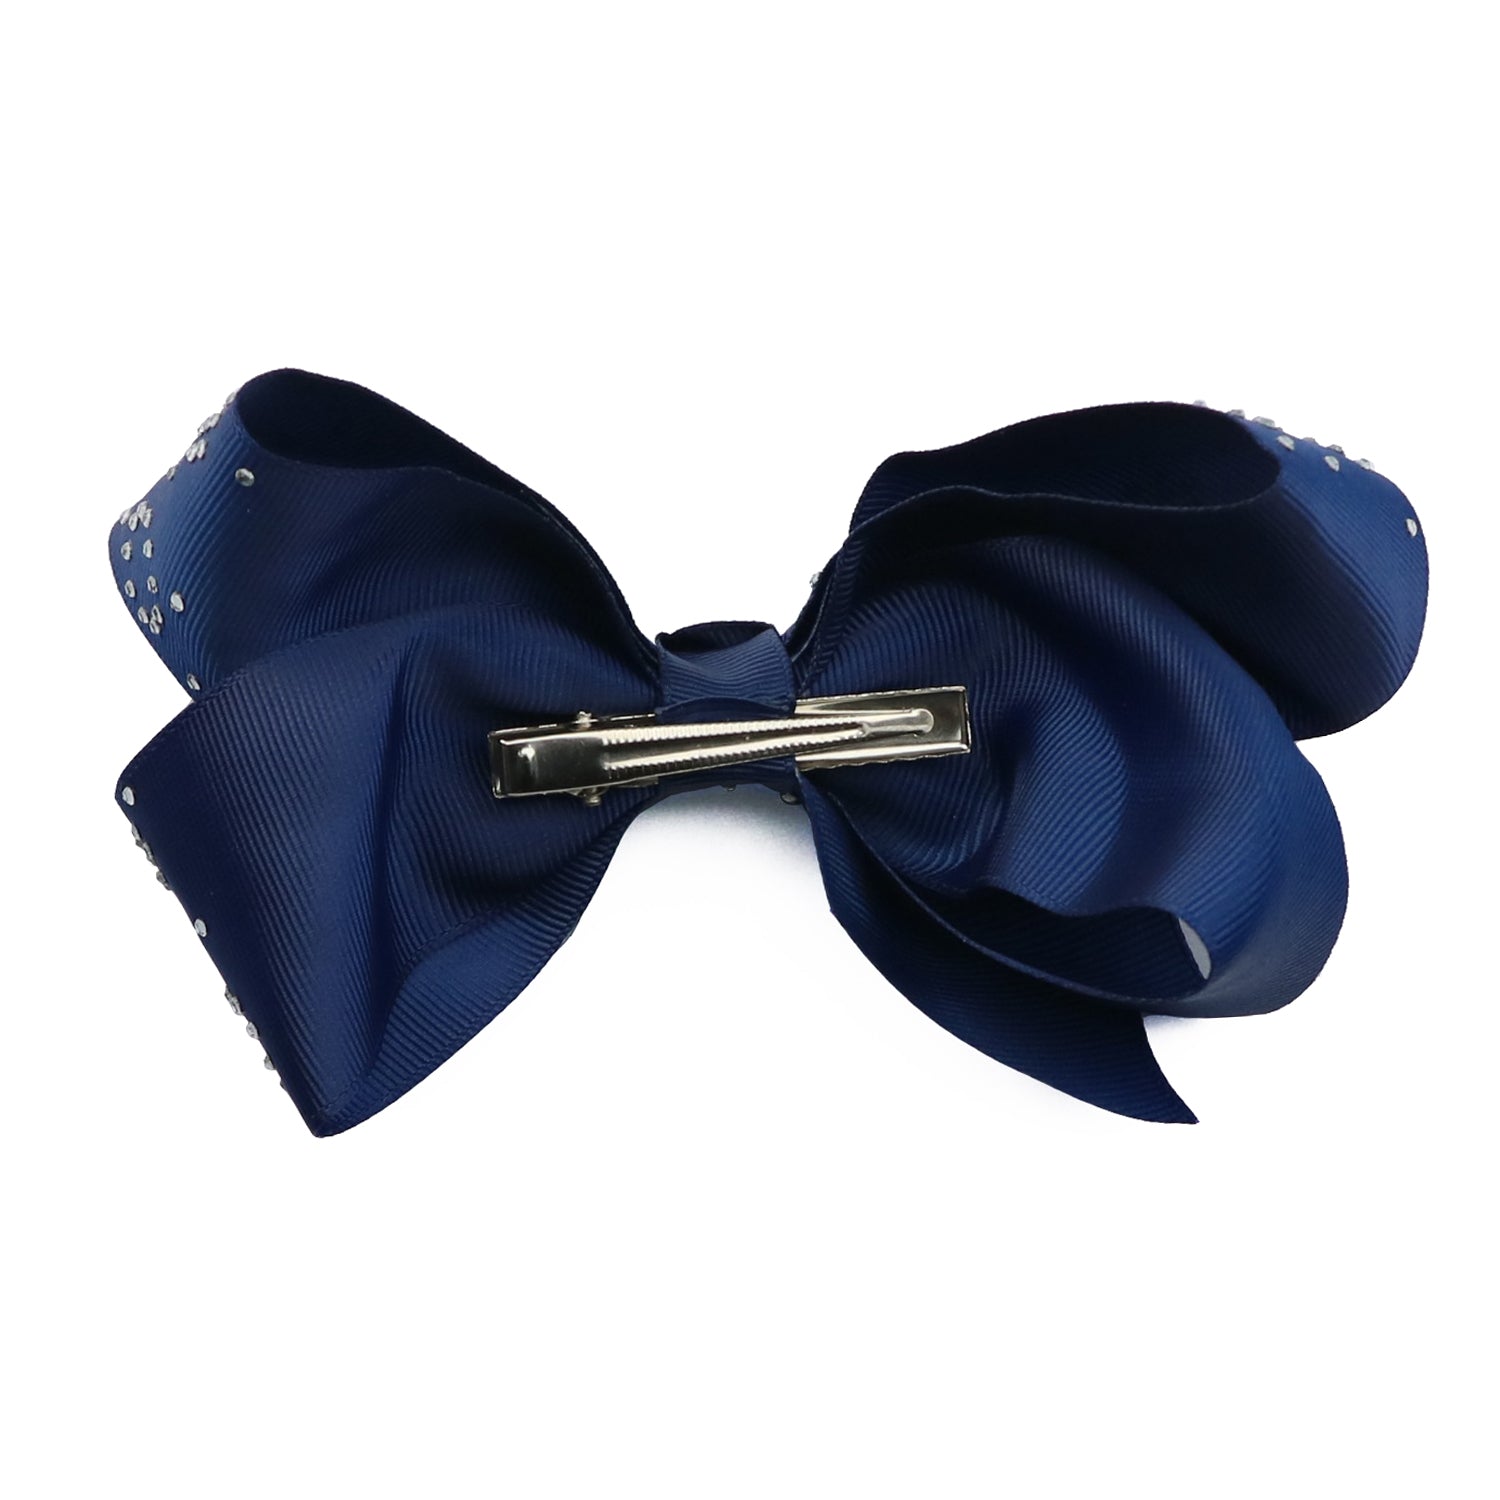 French Toast Jumbo Bow Barrette with Rhinestone Clusters